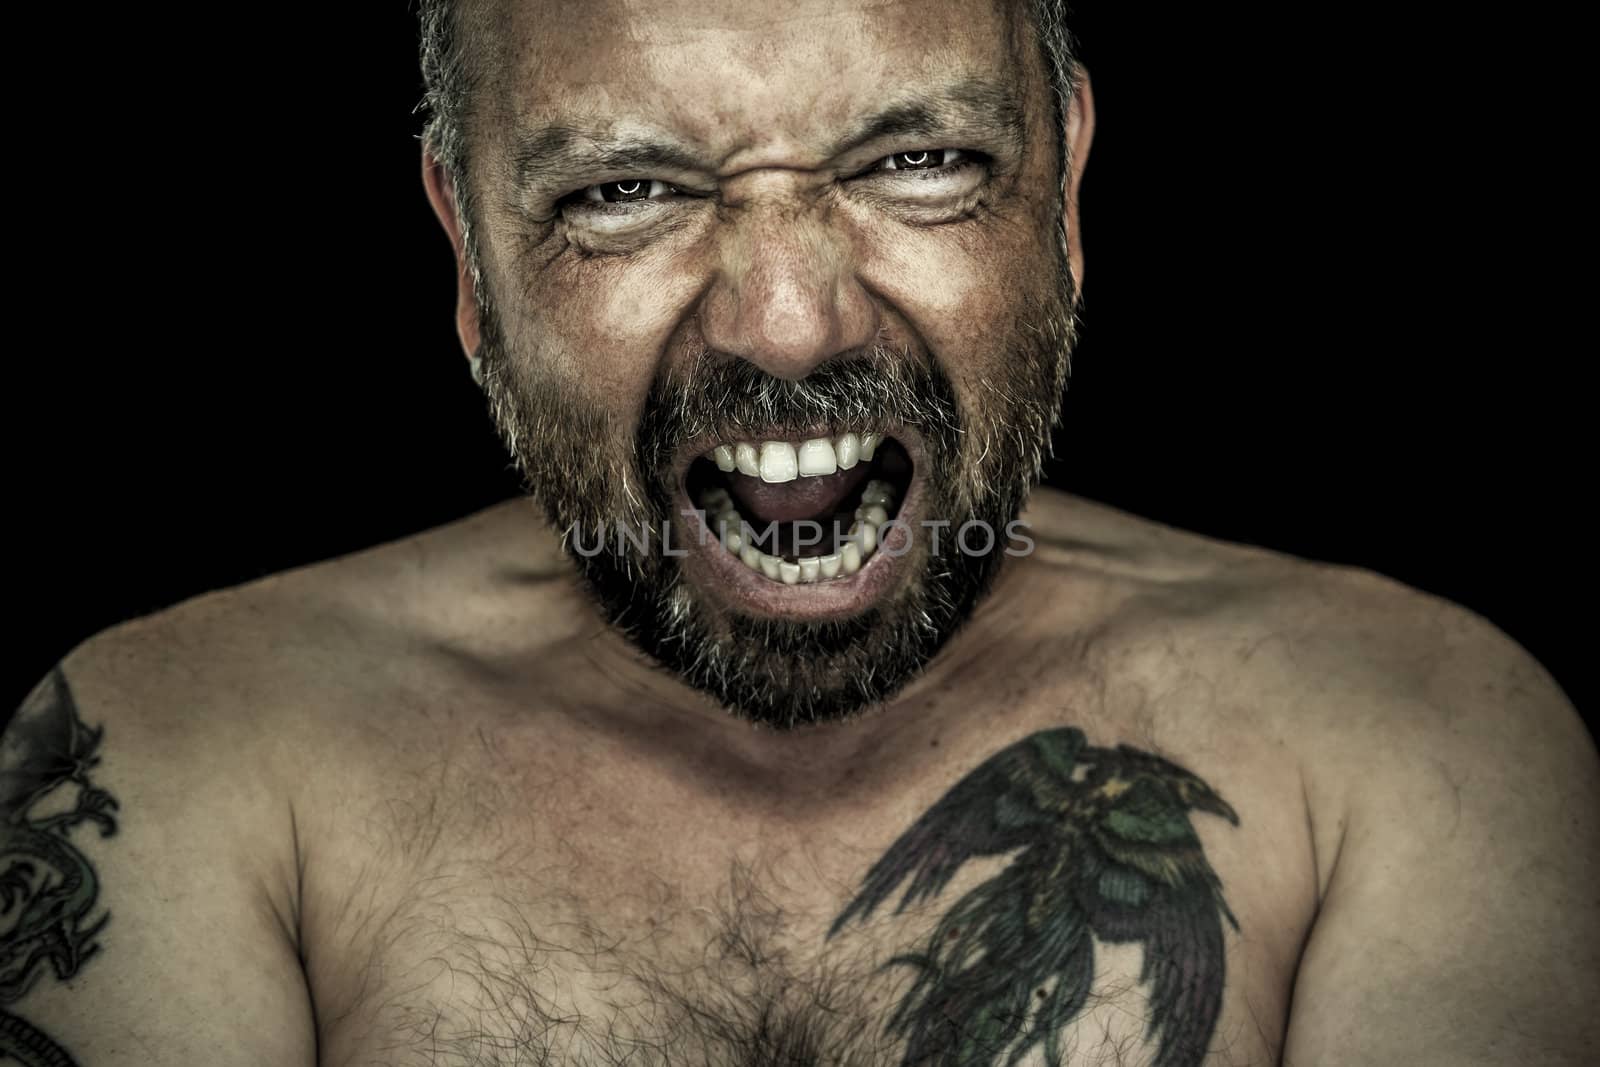 An image of an angry man with a beard